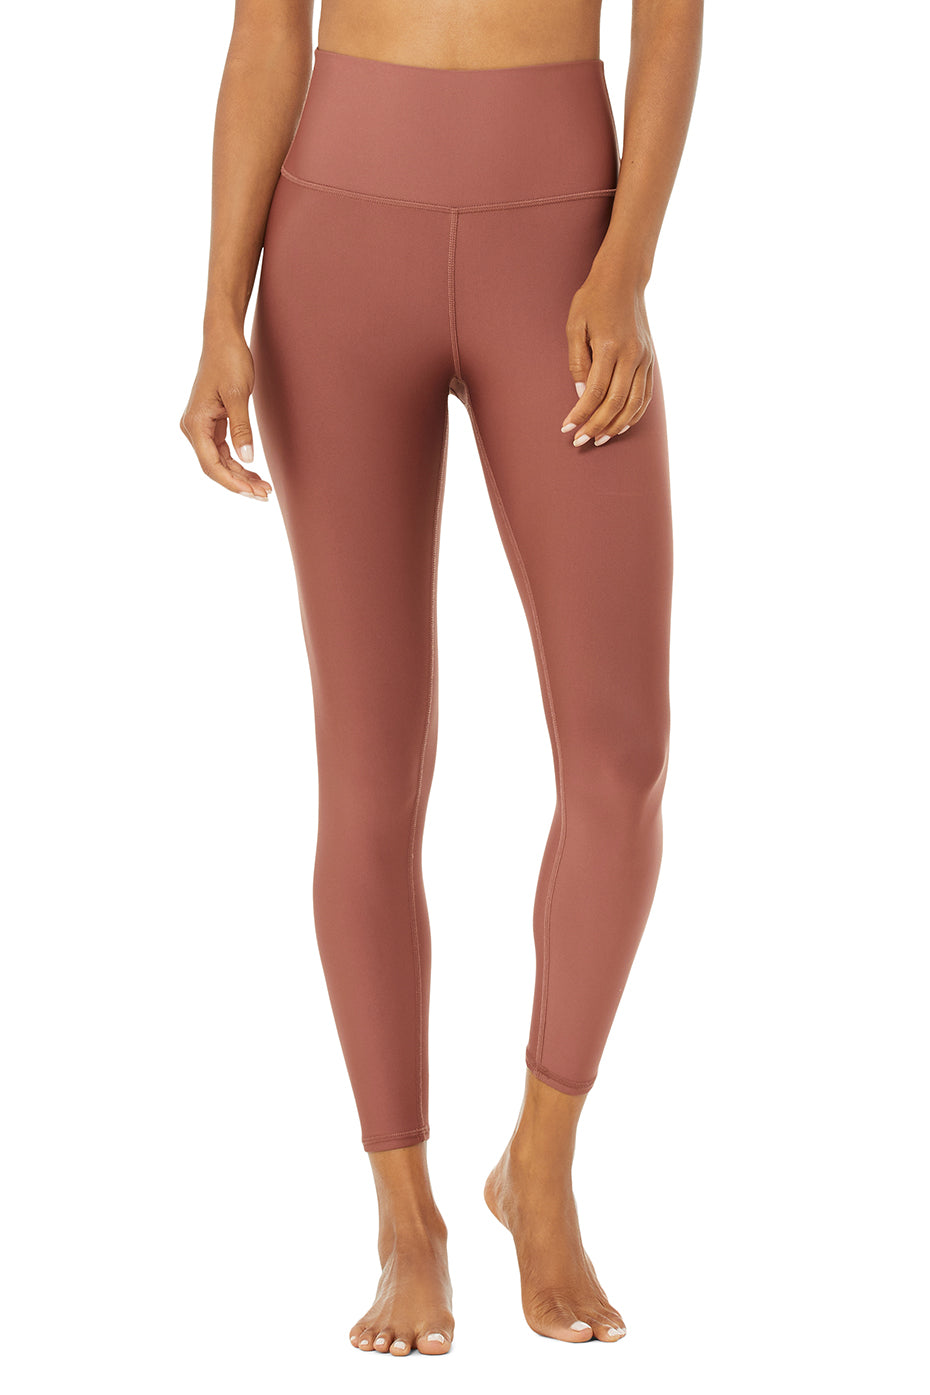 Alo 7/8 Checkpoint leggings in Peachy Glow 🍑, Women's Fashion, Activewear  on Carousell